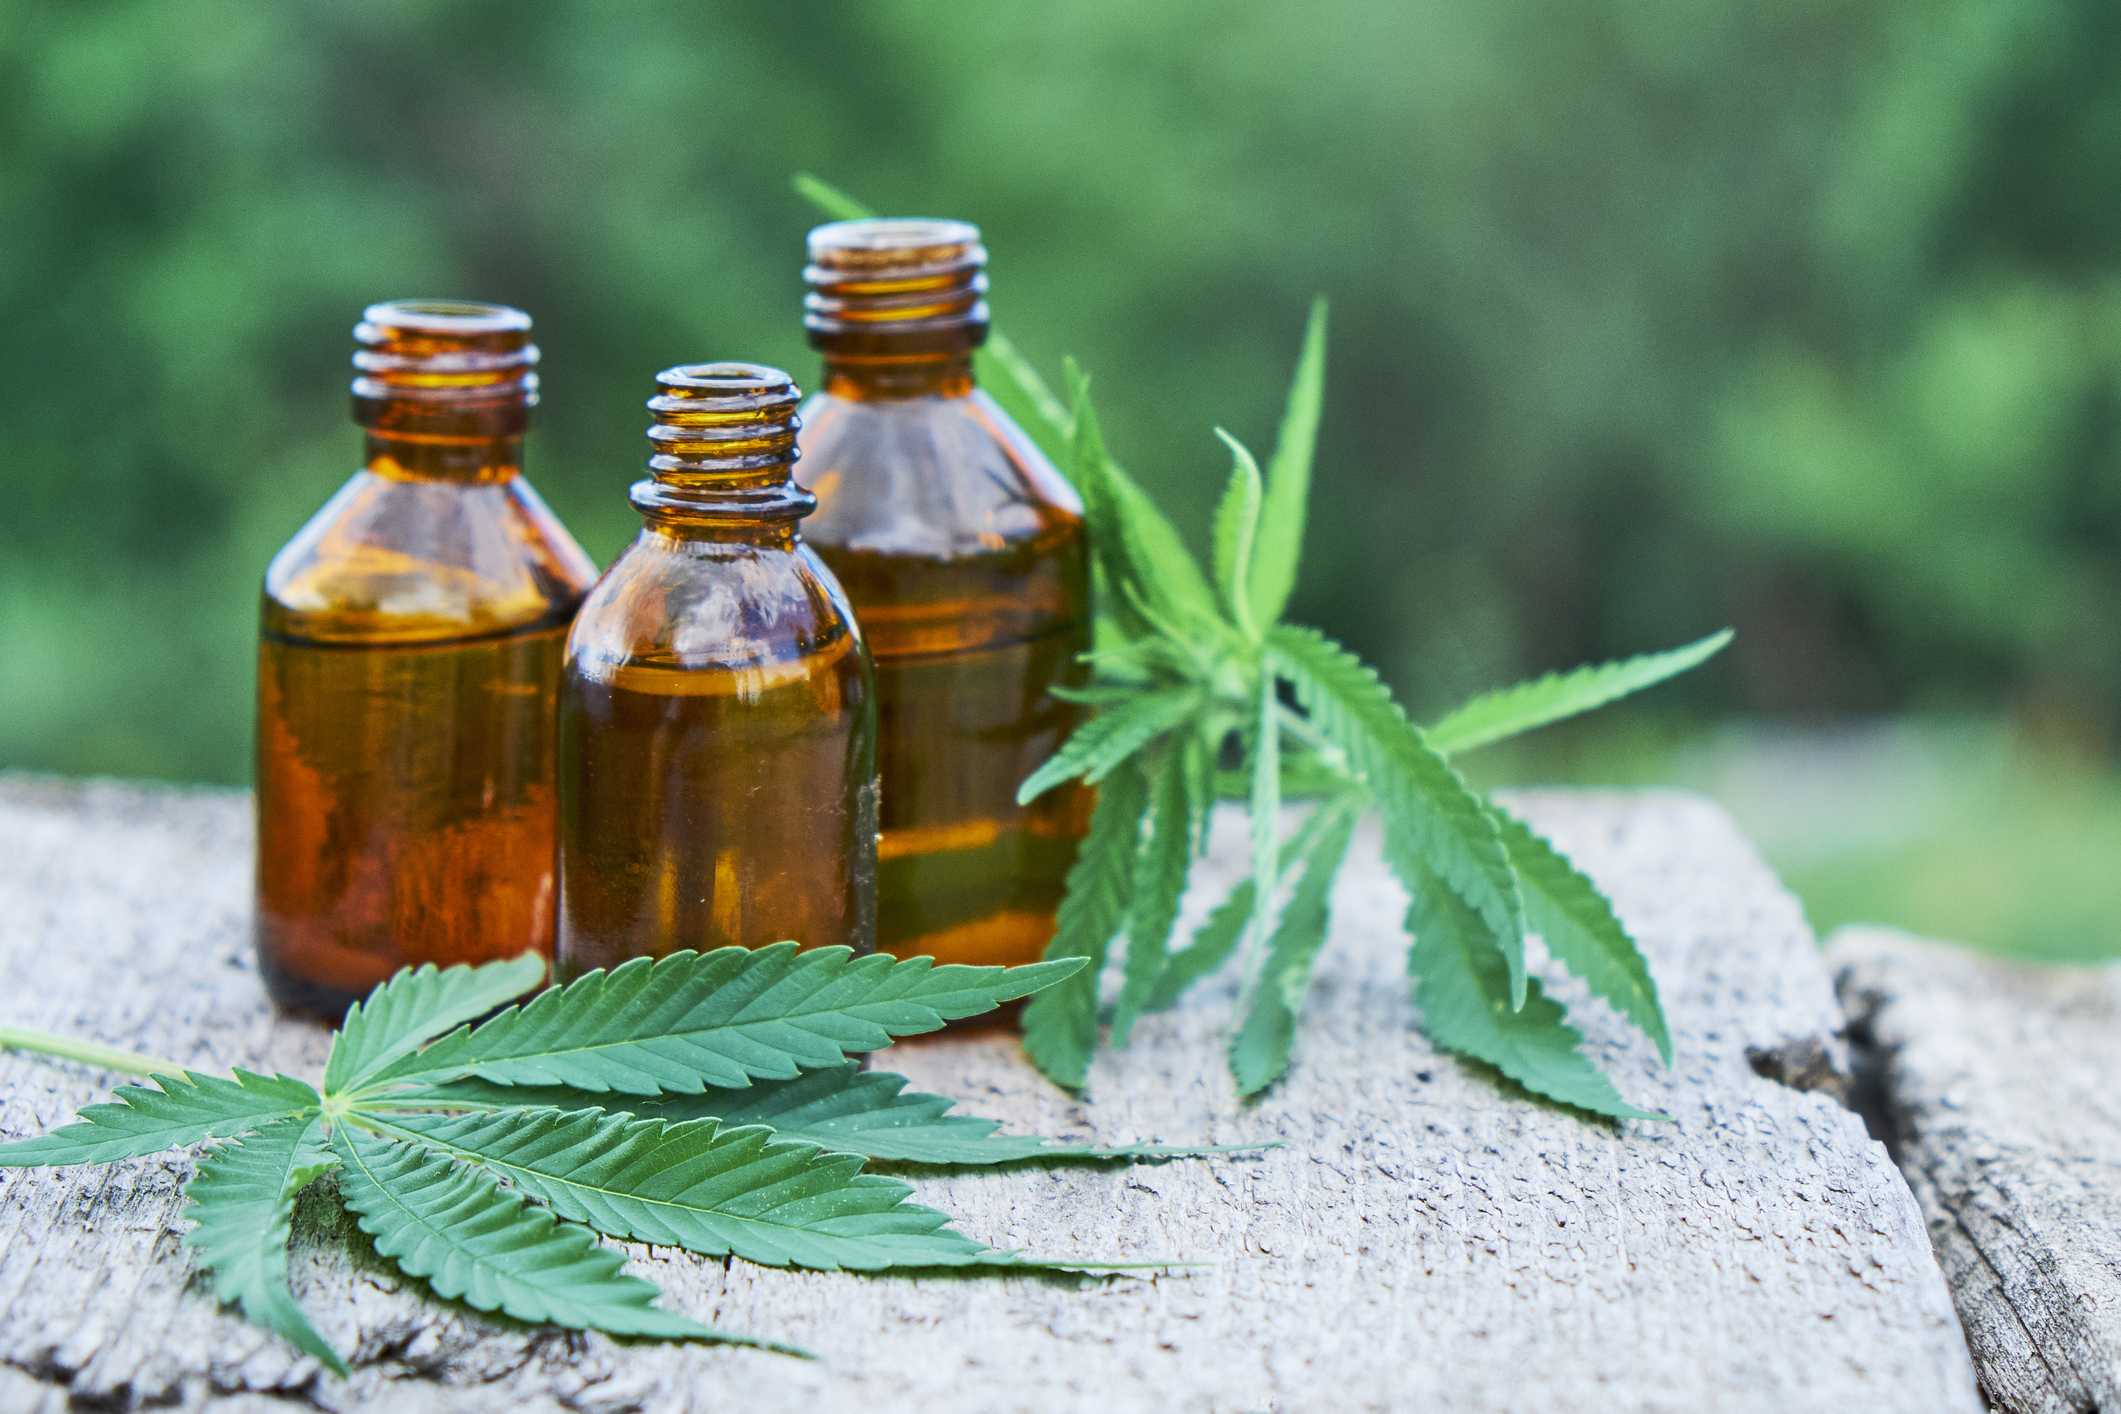 How Much Cbd Oil Do I Take - Cbd|Oil|Cannabidiol|Products|View|Abstract|Effects|Hemp|Cannabis|Product|Thc|Pain|People|Health|Body|Plant|Cannabinoids|Medications|Oils|Drug|Benefits|System|Study|Marijuana|Anxiety|Side|Research|Effect|Liver|Quality|Treatment|Studies|Epilepsy|Symptoms|Gummies|Compounds|Dose|Time|Inflammation|Bottle|Cbd Oil|View Abstract|Side Effects|Cbd Products|Endocannabinoid System|Multiple Sclerosis|Cbd Oils|Cbd Gummies|Cannabis Plant|Hemp Oil|Cbd Product|Hemp Plant|United States|Cytochrome P450|Many People|Chronic Pain|Nuleaf Naturals|Royal Cbd|Full-Spectrum Cbd Oil|Drug Administration|Cbd Oil Products|Medical Marijuana|Drug Test|Heavy Metals|Clinical Trial|Clinical Trials|Cbd Oil Side|Rating Highlights|Wide Variety|Animal Studies